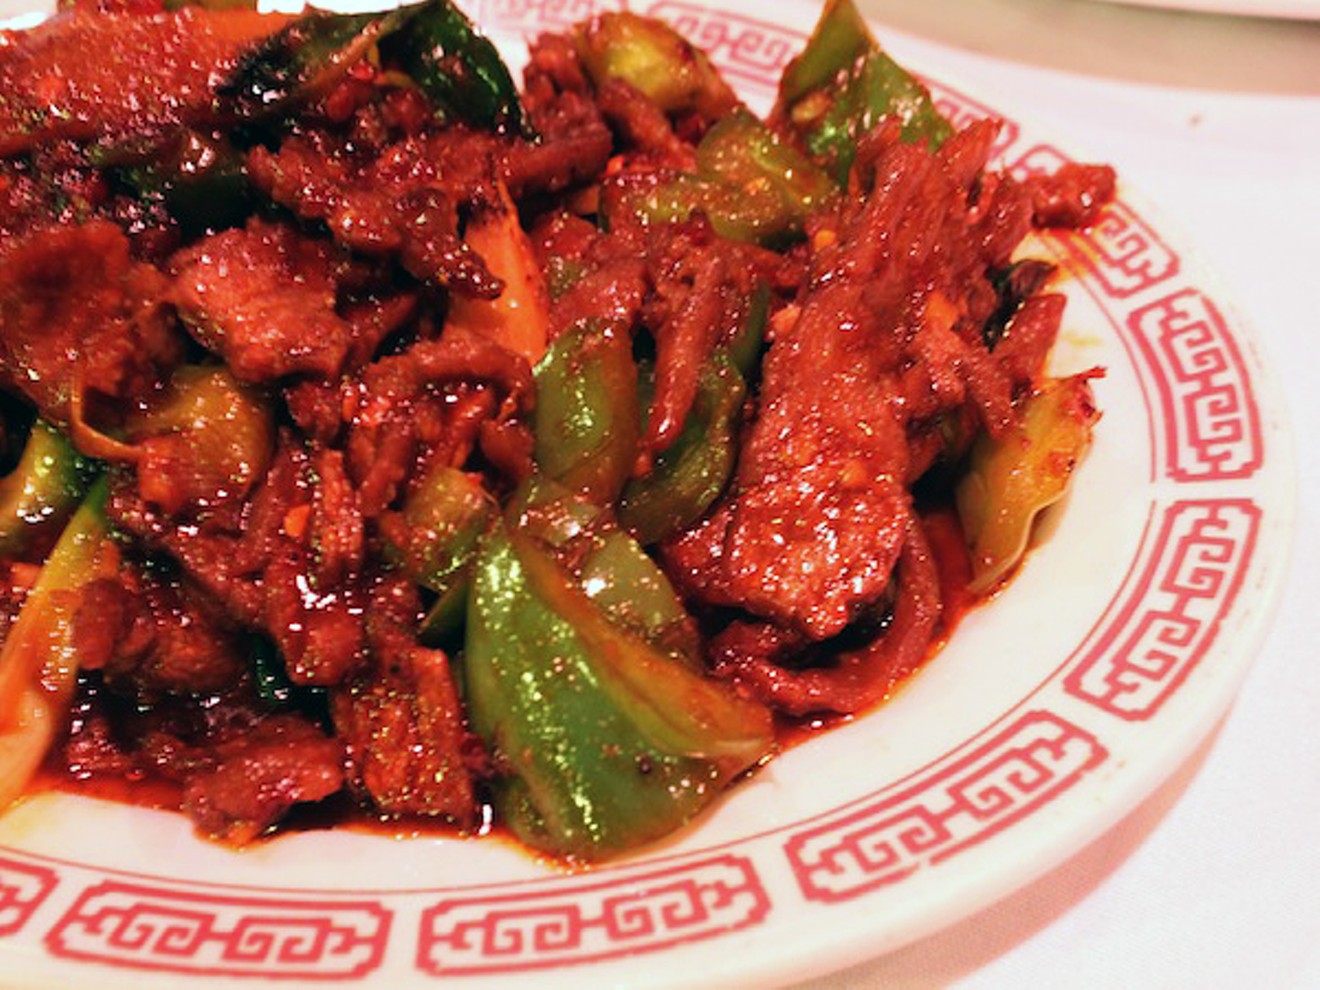 China Village served classic Chinese cuisine in the Valley for over three decades.